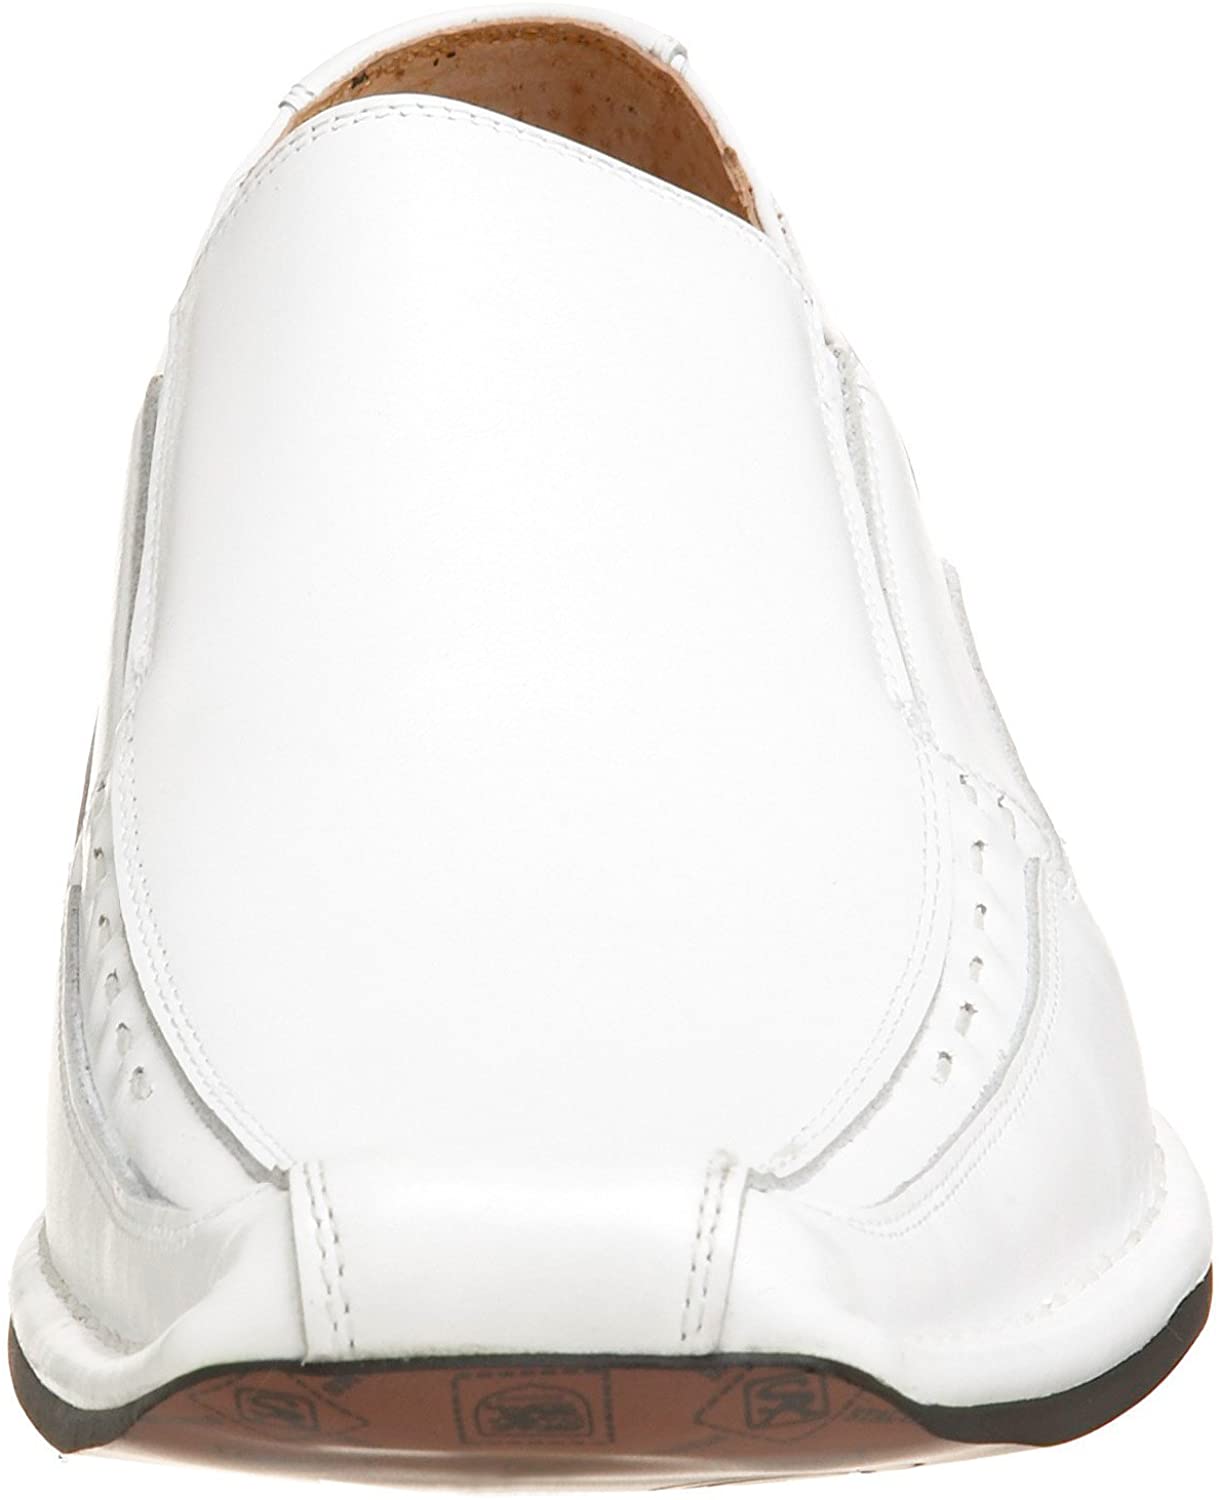 Men's Stacy Adams Templin 24507 White Leather 11 M - image 2 of 7